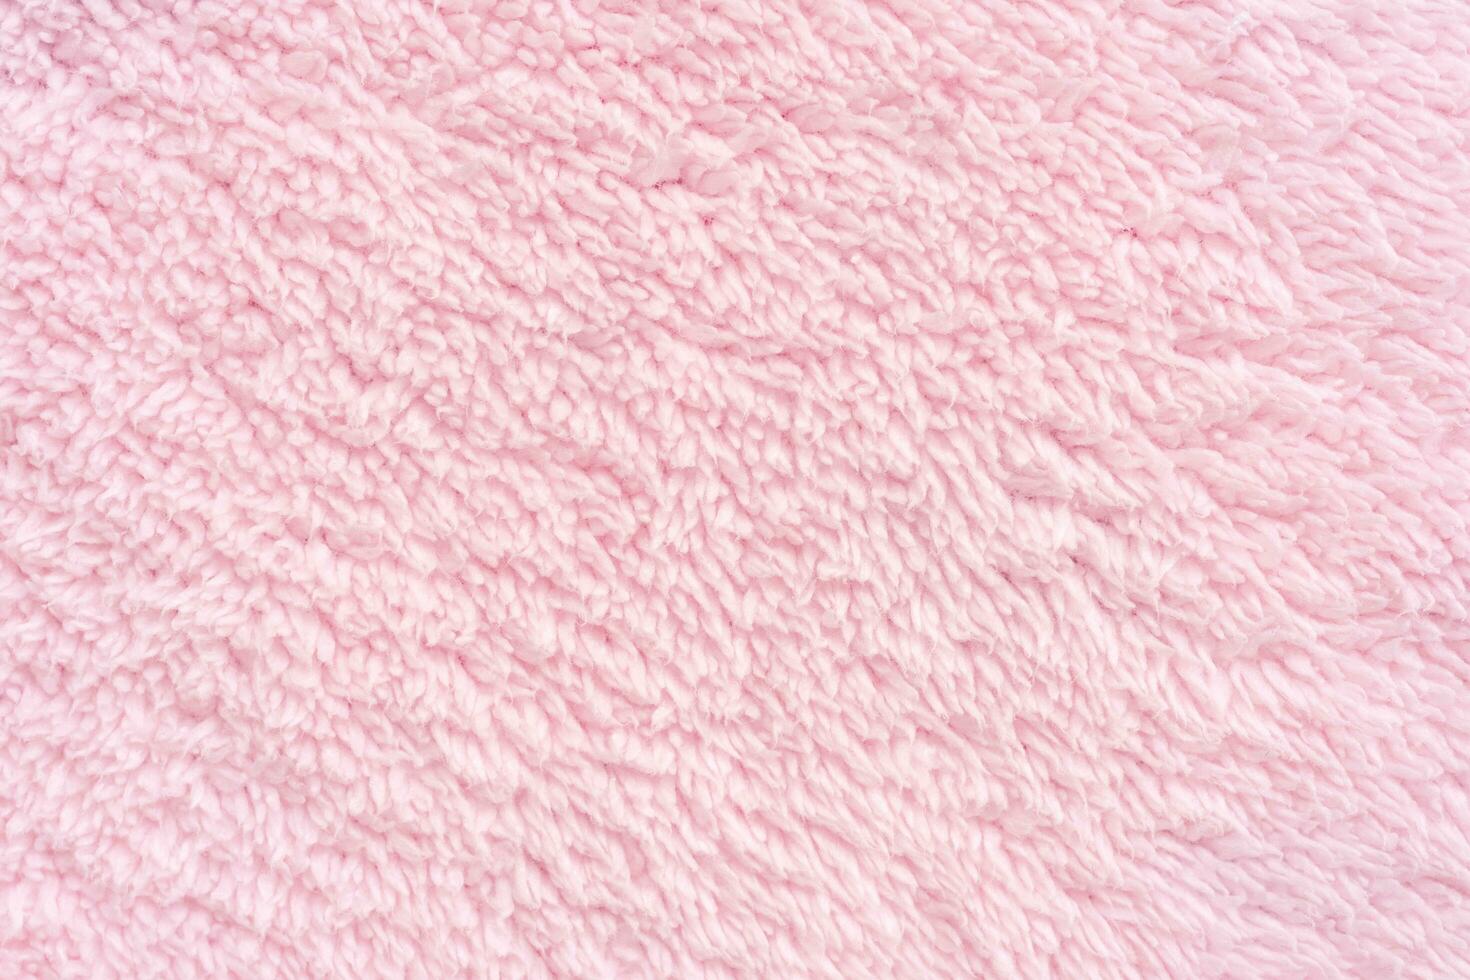 close up pink towel texture and background photo